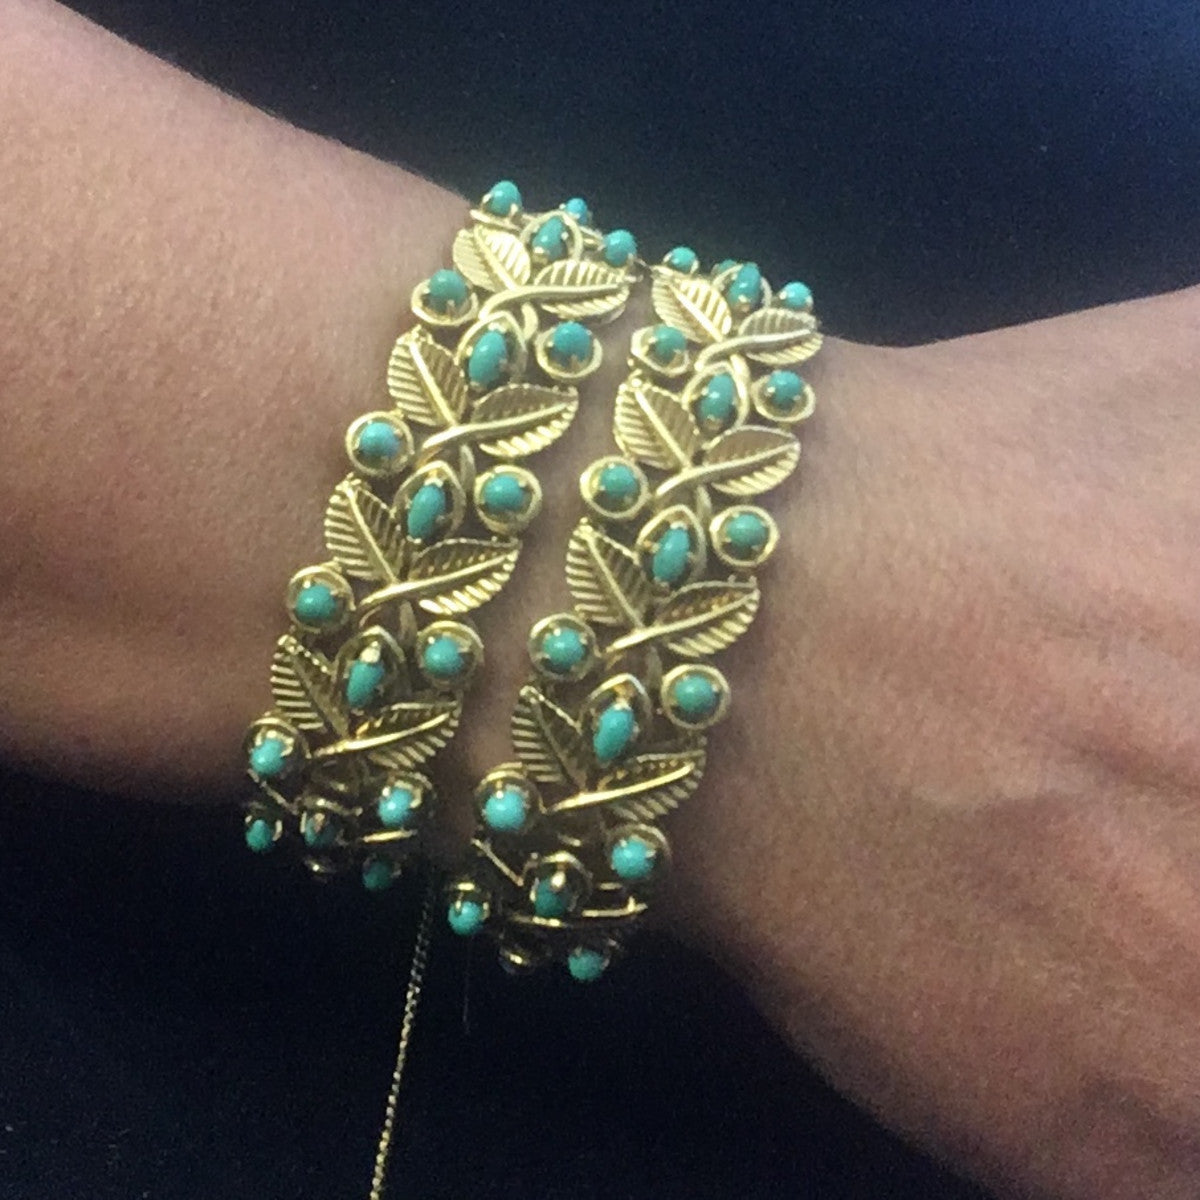 French 1950s 18KT Yellow Gold Turquoise Bracelets on wrist